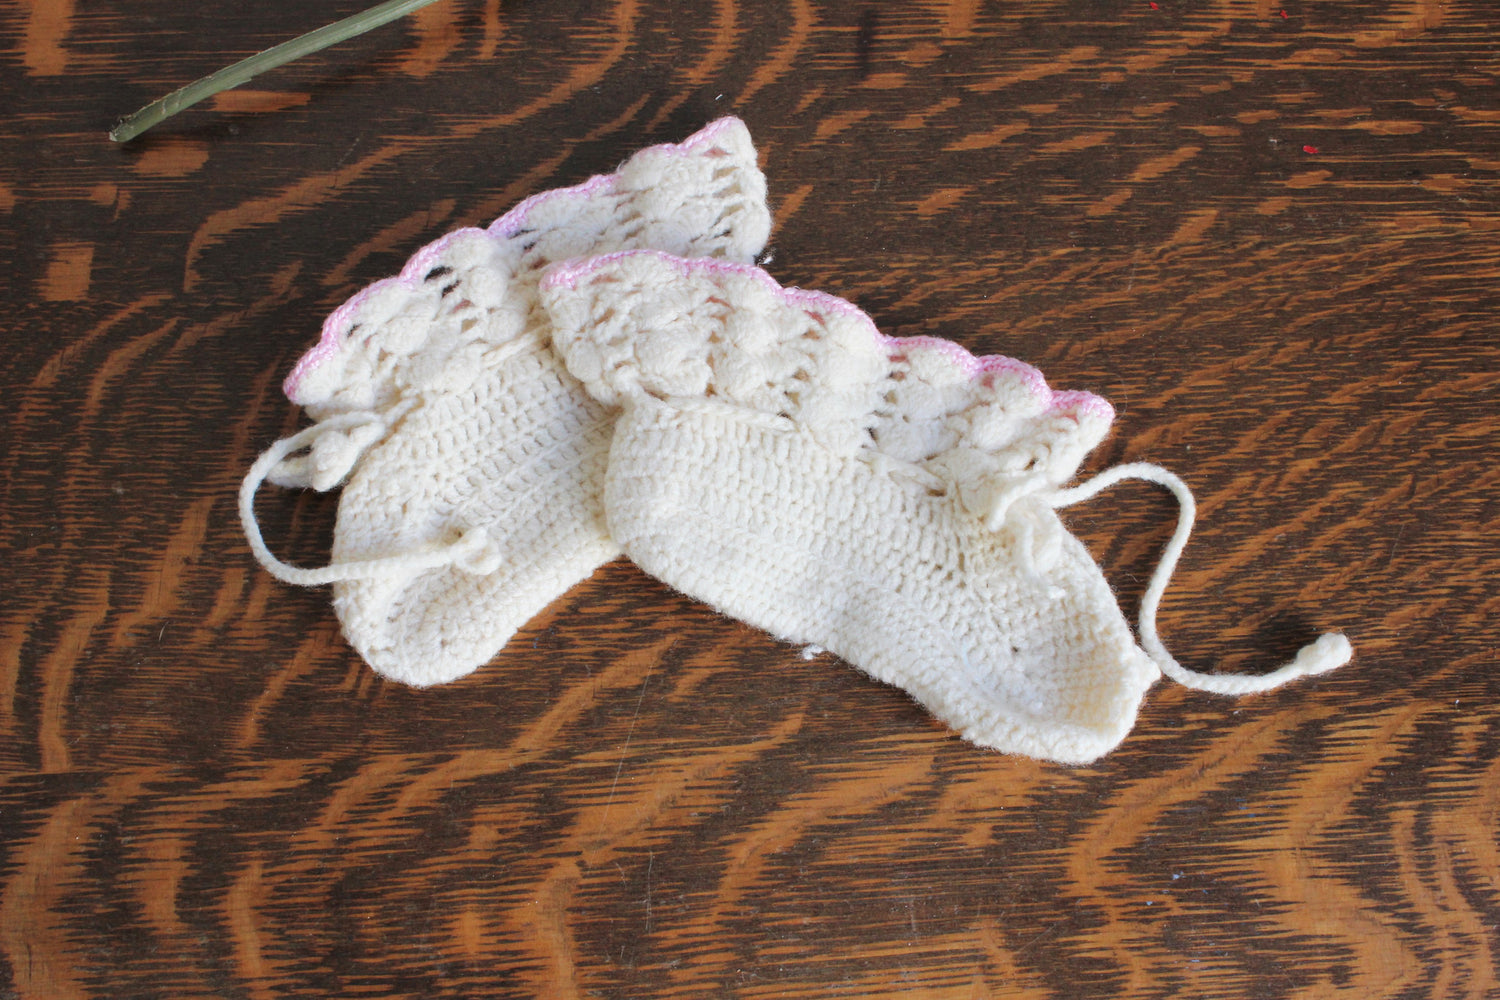 Vintage 1950s Baby Booties / Infant Girls Crochet Ivory With Pink Trim